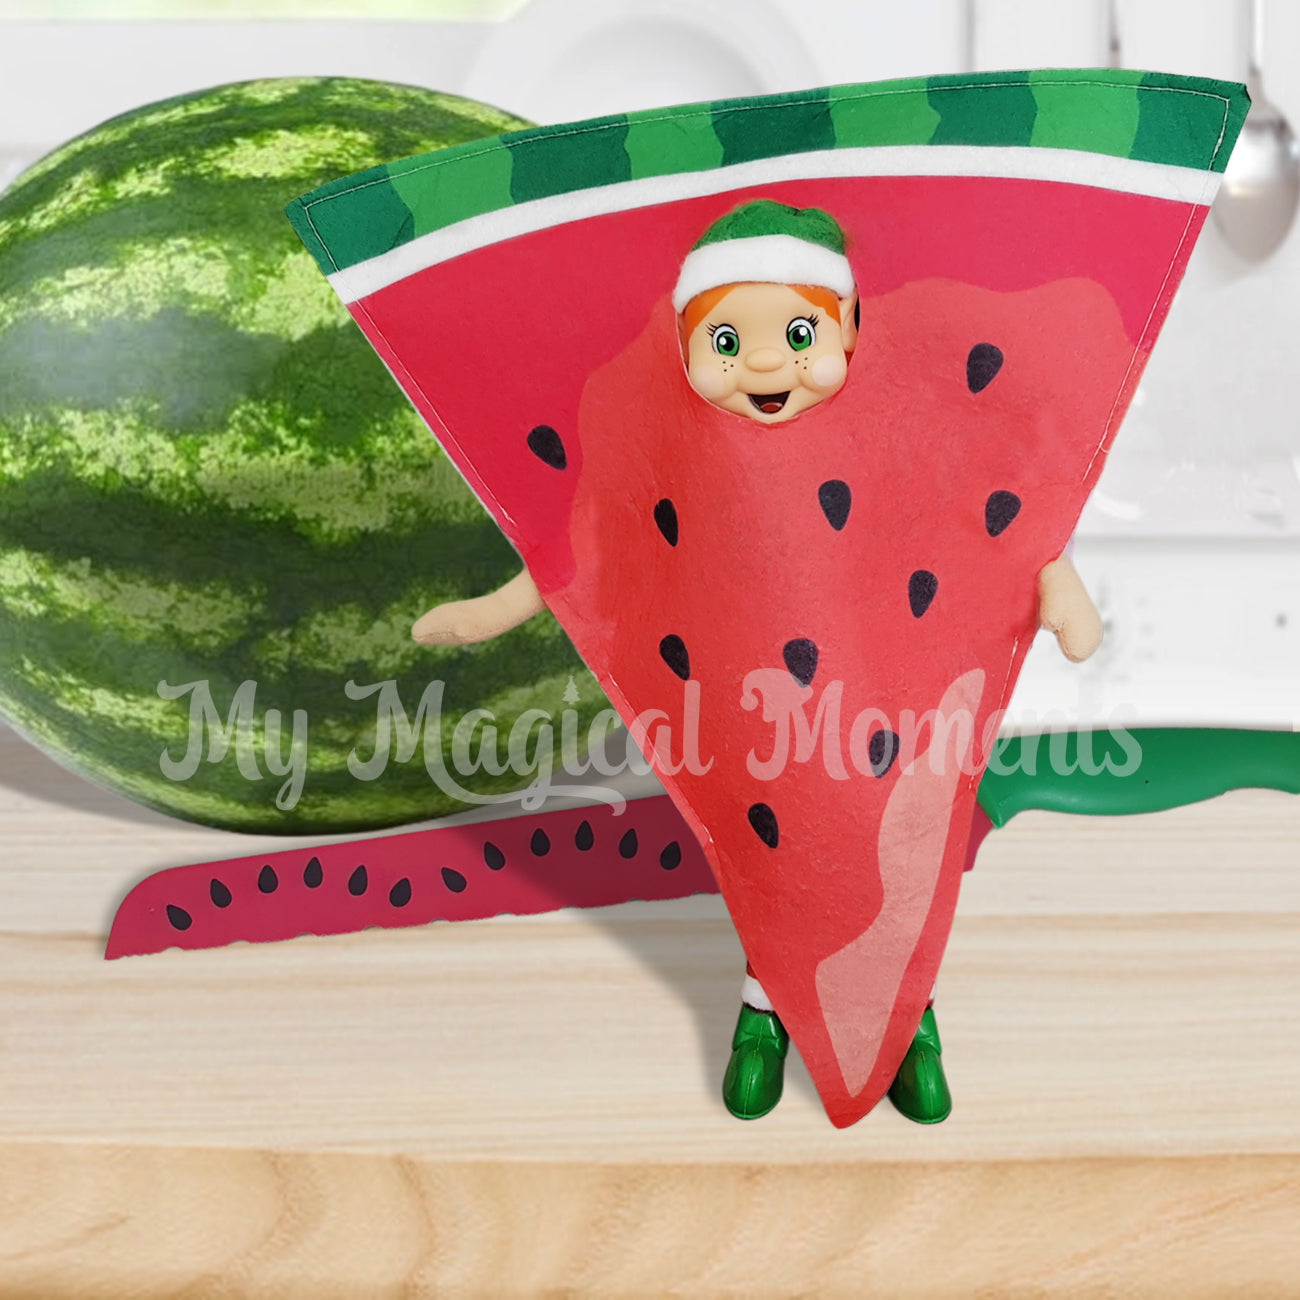 My Elf friends dressed as a watermelon in front of the fruit